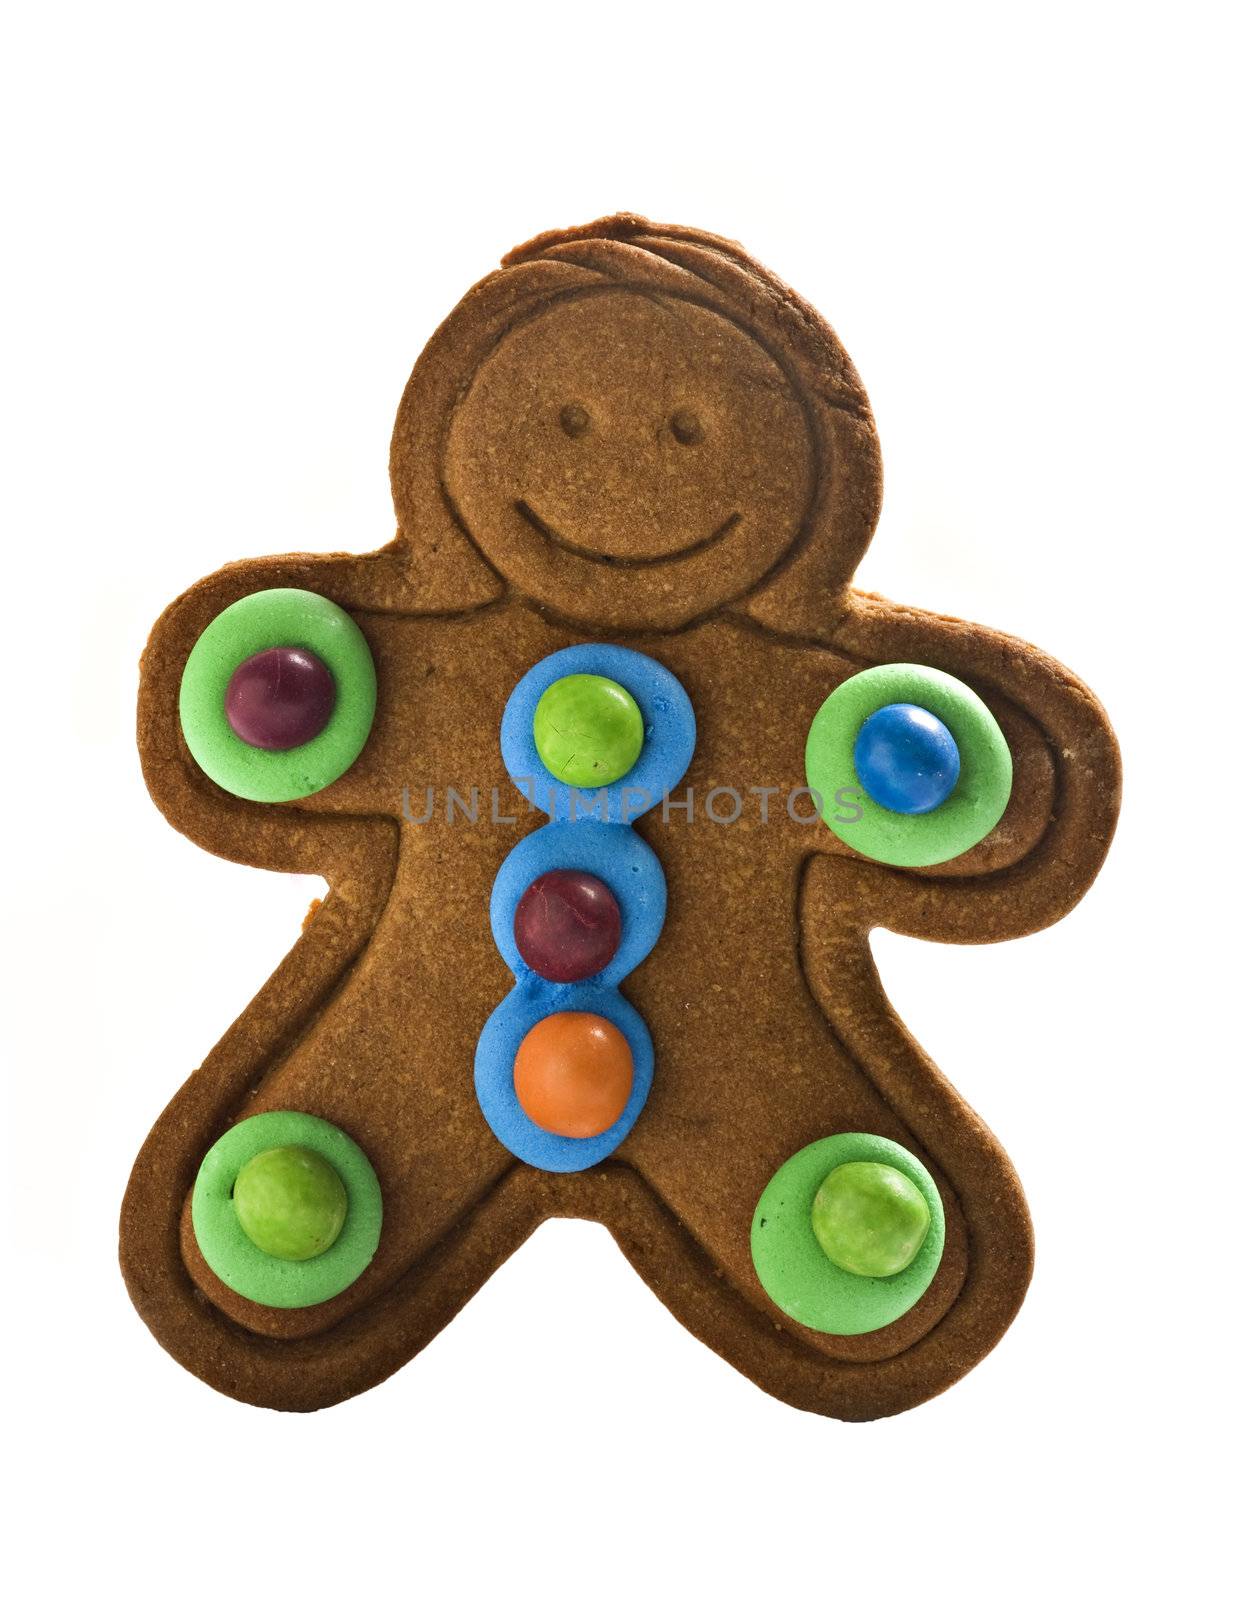 Gingerbread man on white background with space for text by tish1